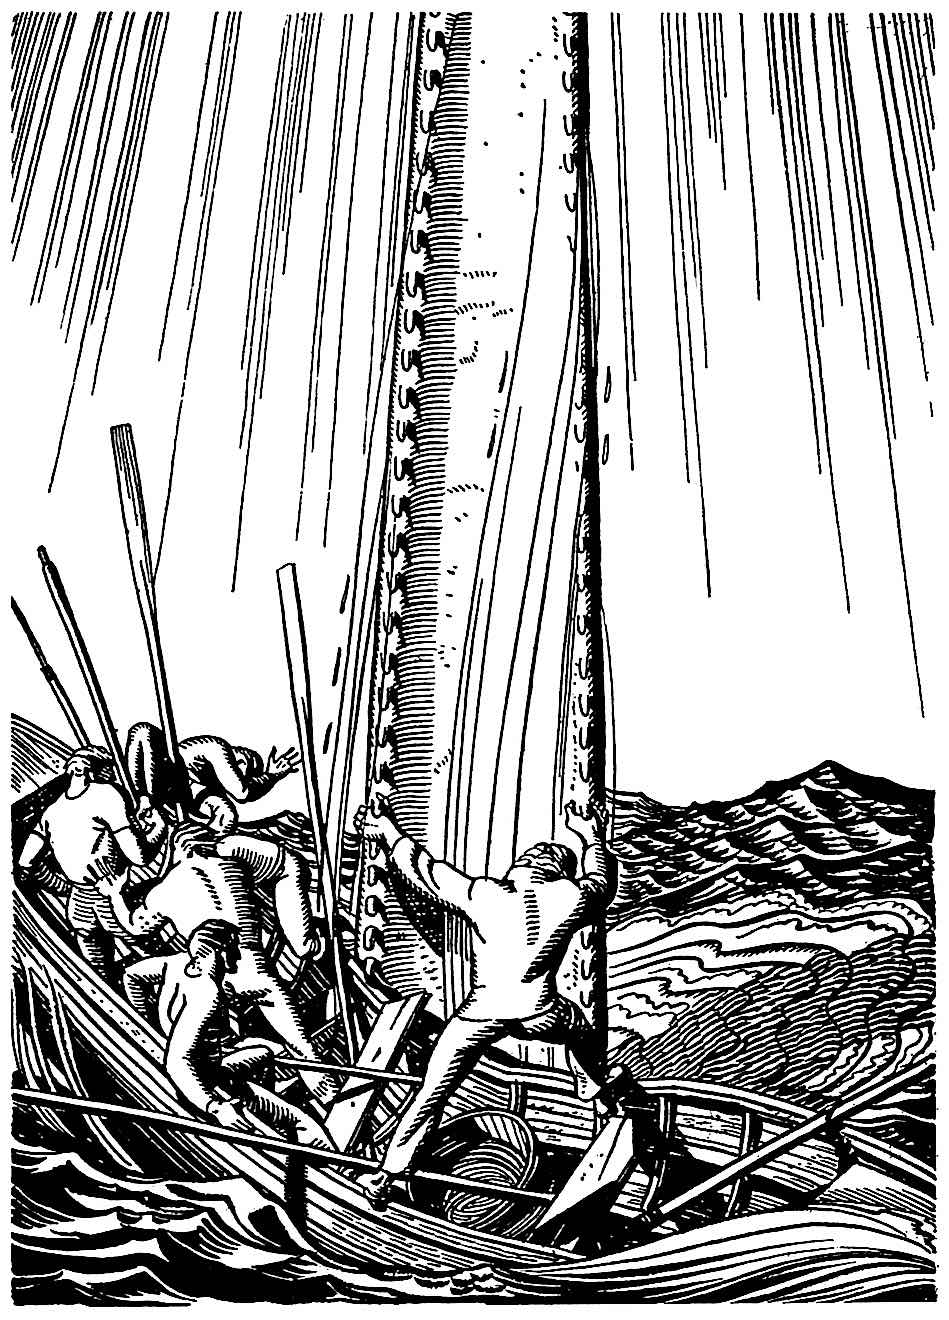 a Rockwell Kent illustration of whaling